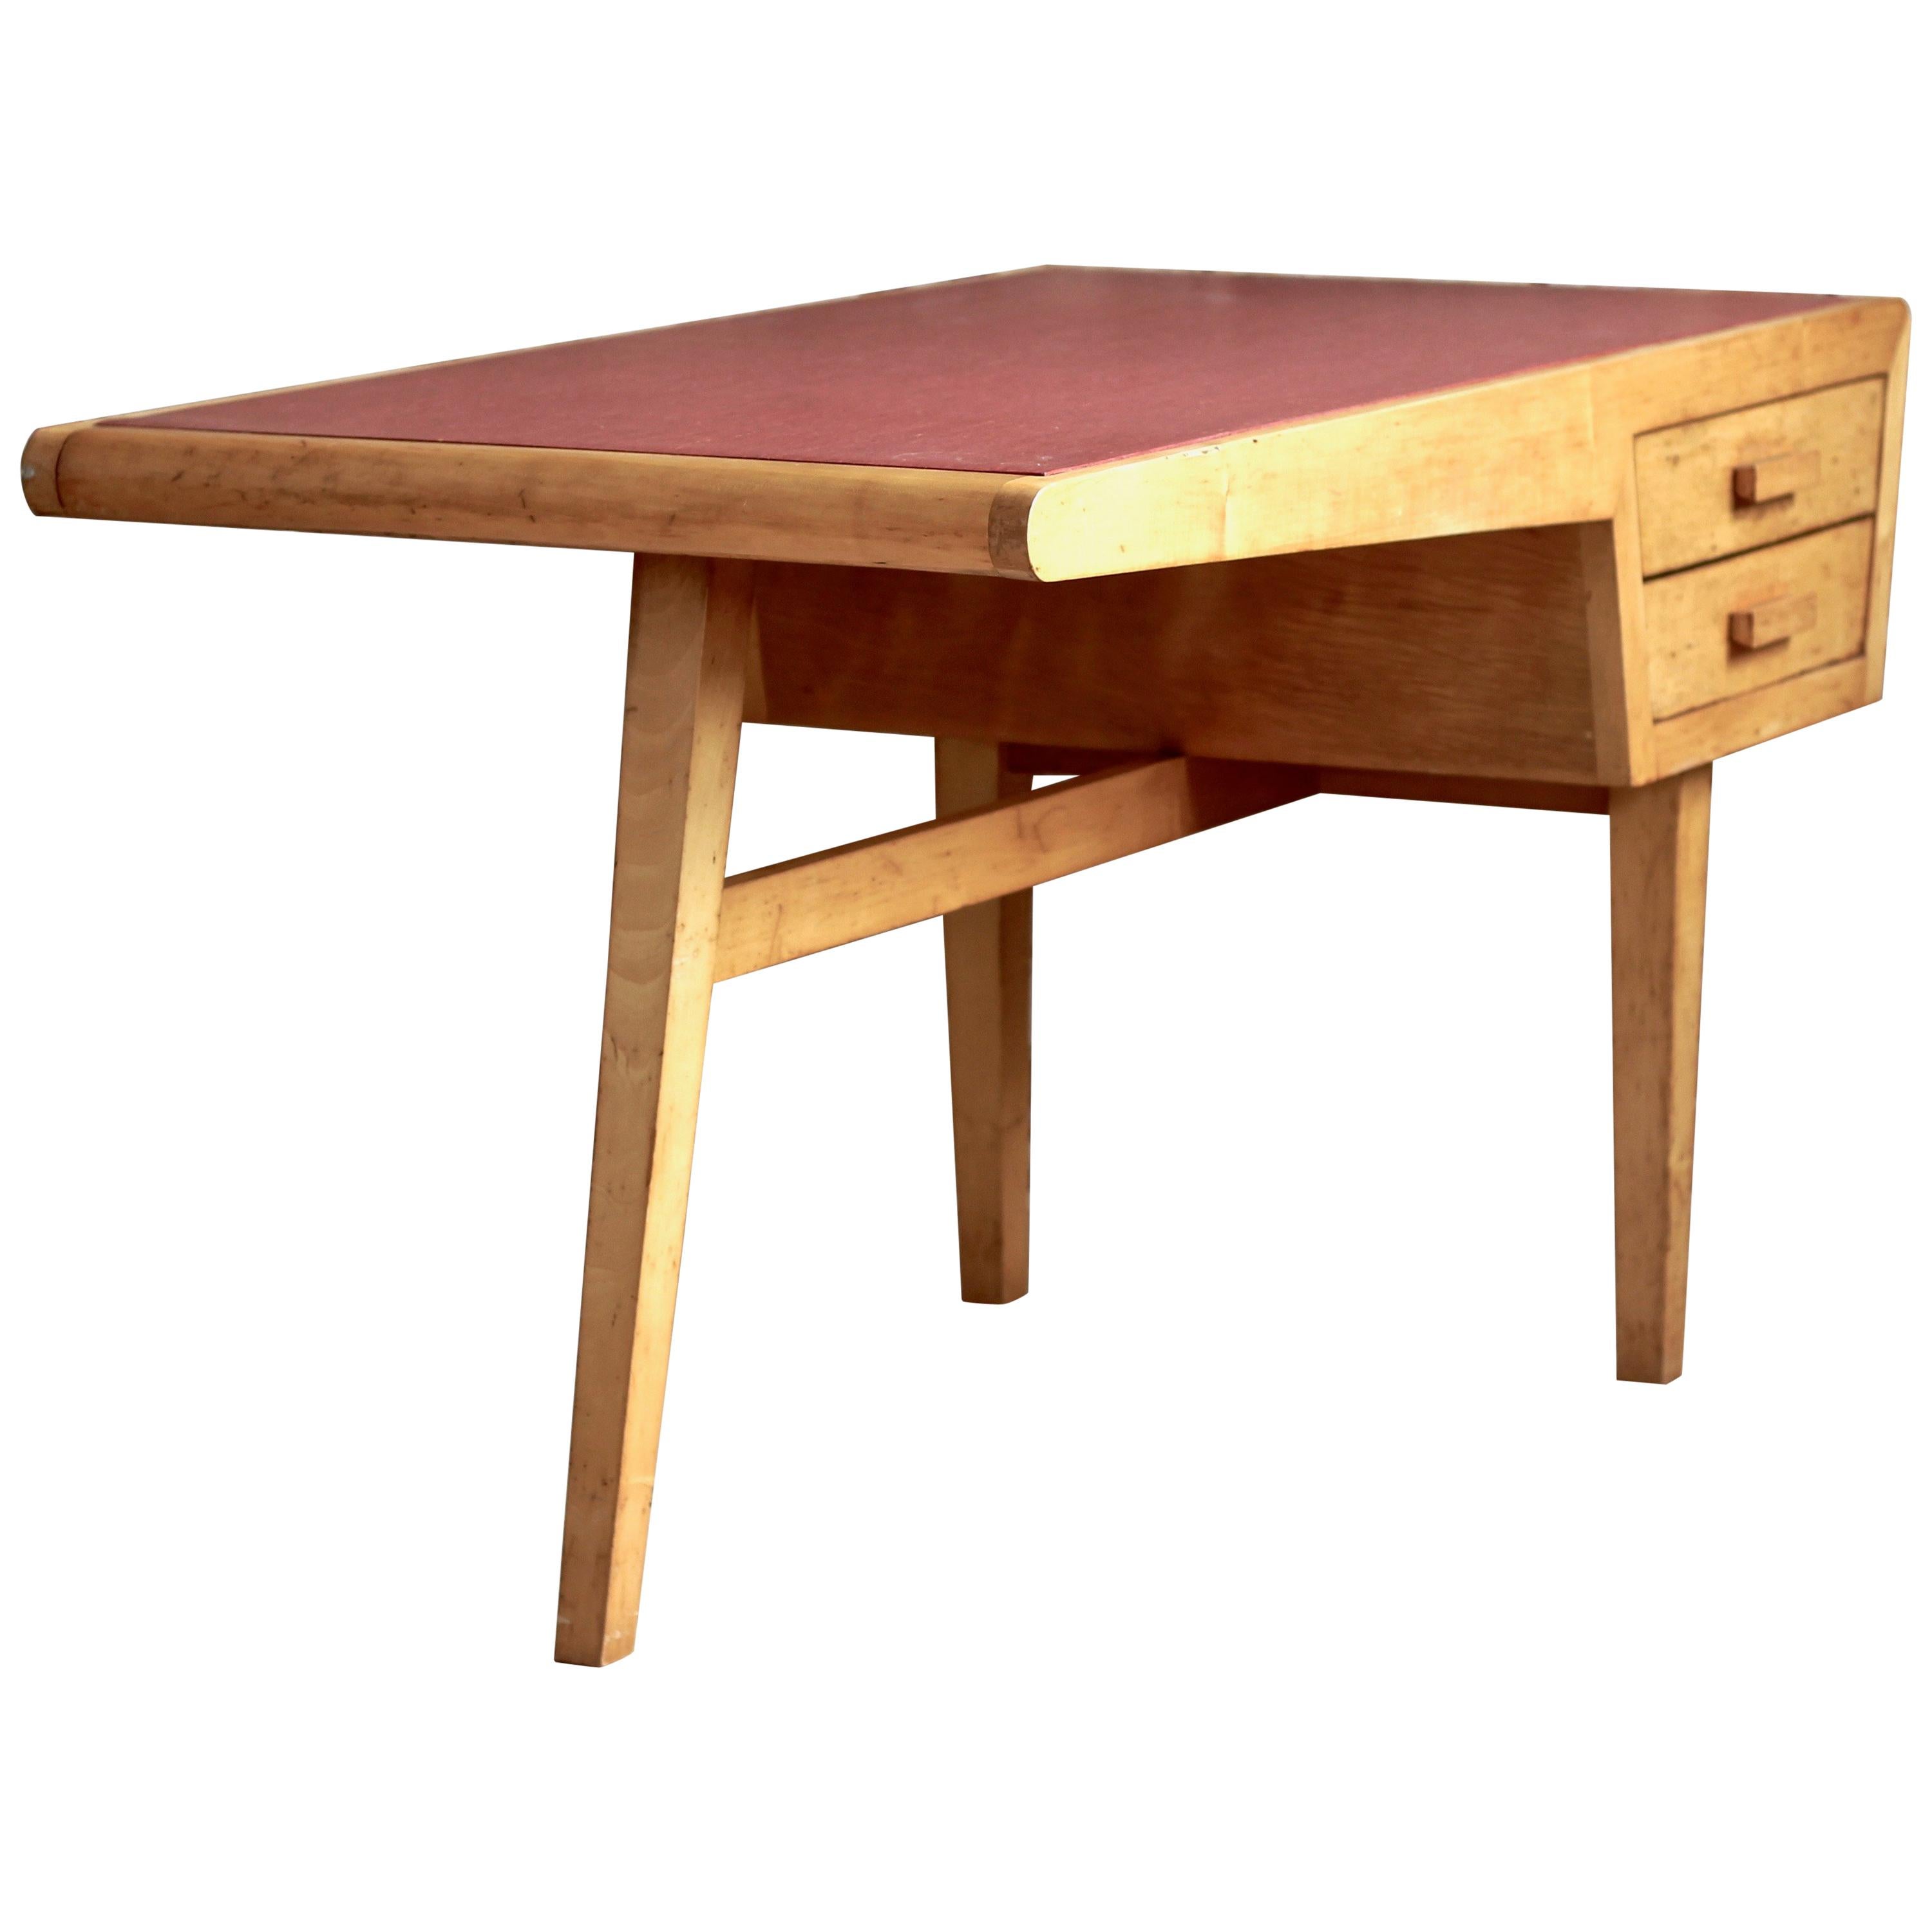 Vintage Writing Desk by Picus Furniture, Mid-Century Modern